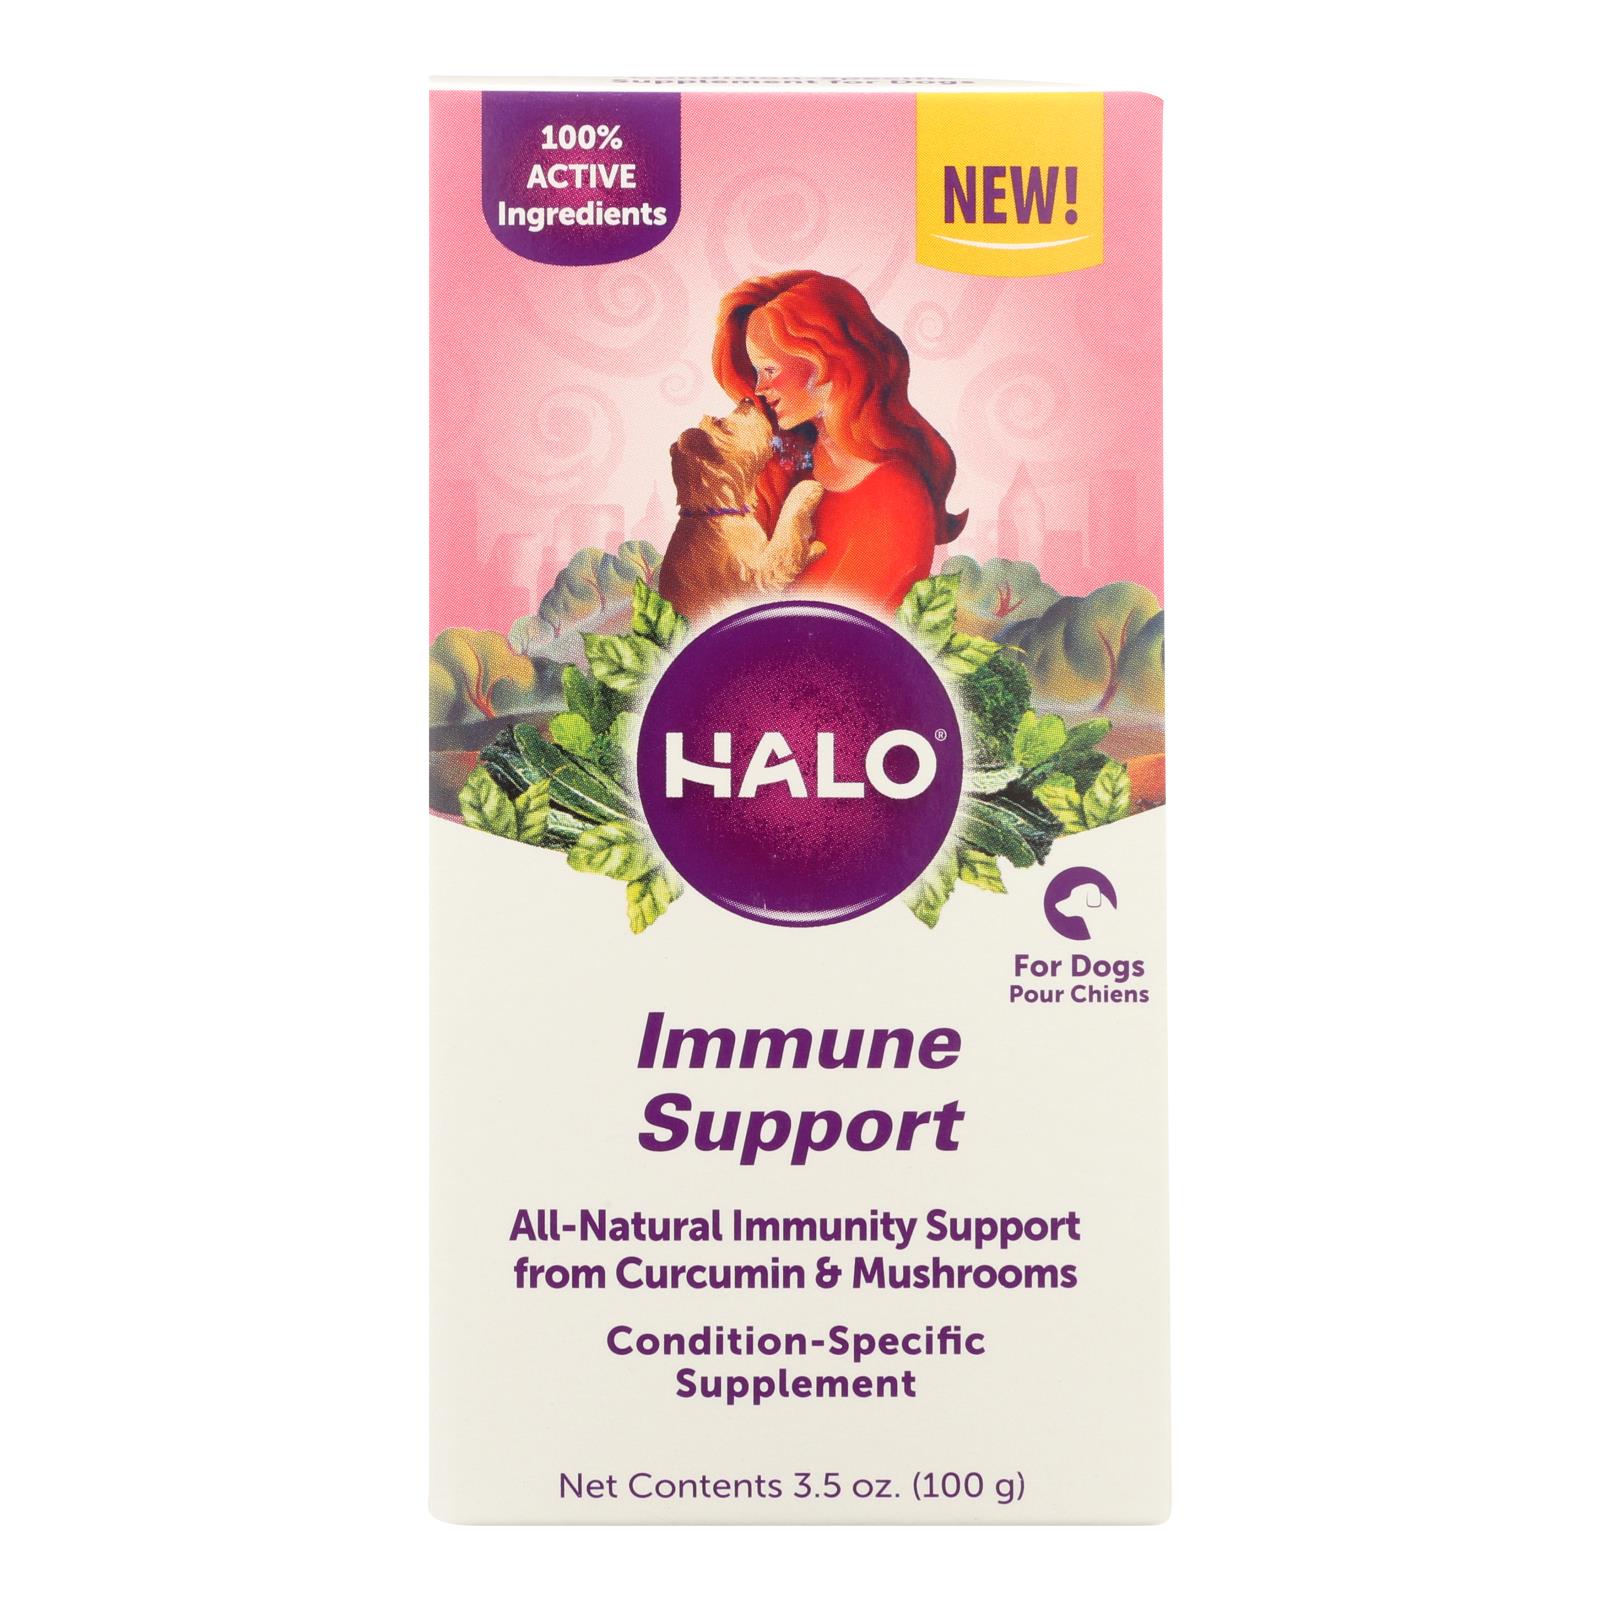 Halo Purely For Pets - Suplmnt Wf Immune Support - 1 Each - 3.5 OZ